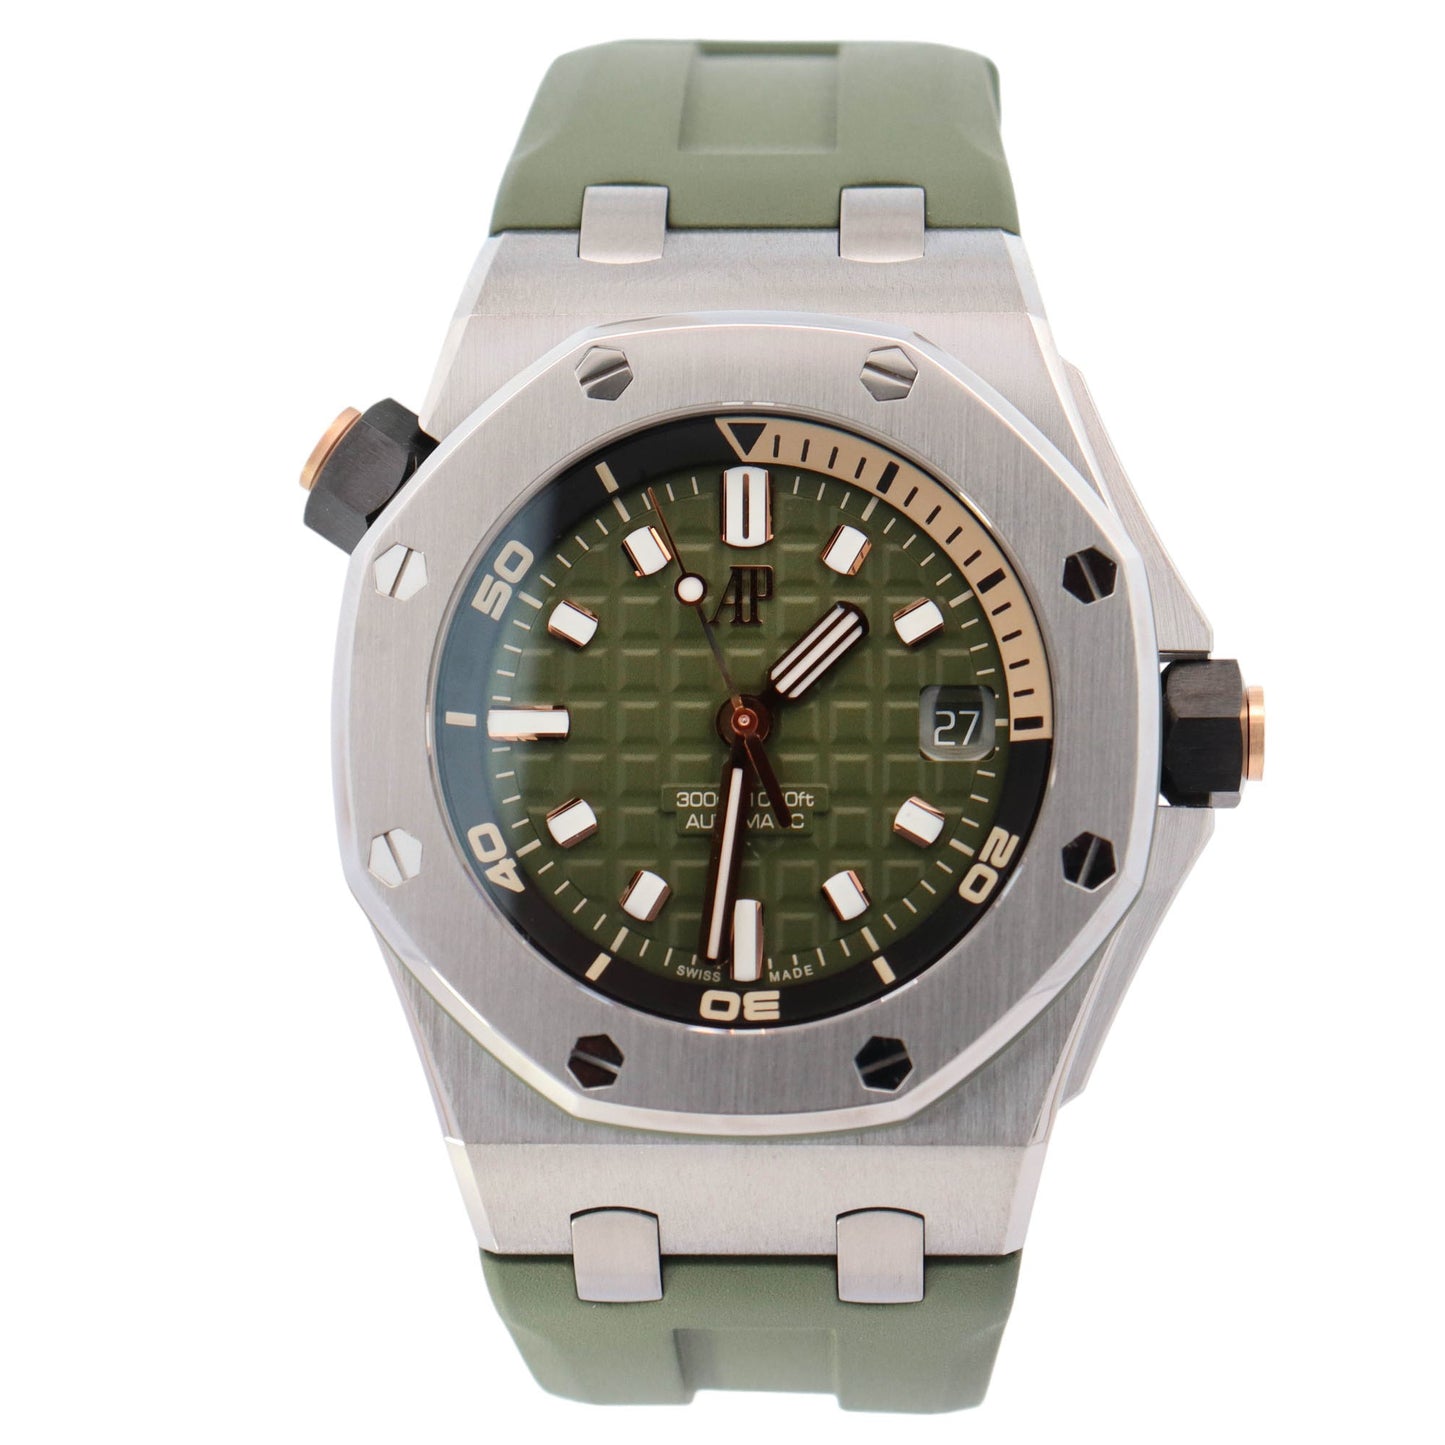 Audemar Piguet Royal Oak Offshore Diver Stainless Steel 42mm Green Stick Dial Watch Reference# 15720ST.OO.A052CA.01 - Happy Jewelers Fine Jewelry Lifetime Warranty